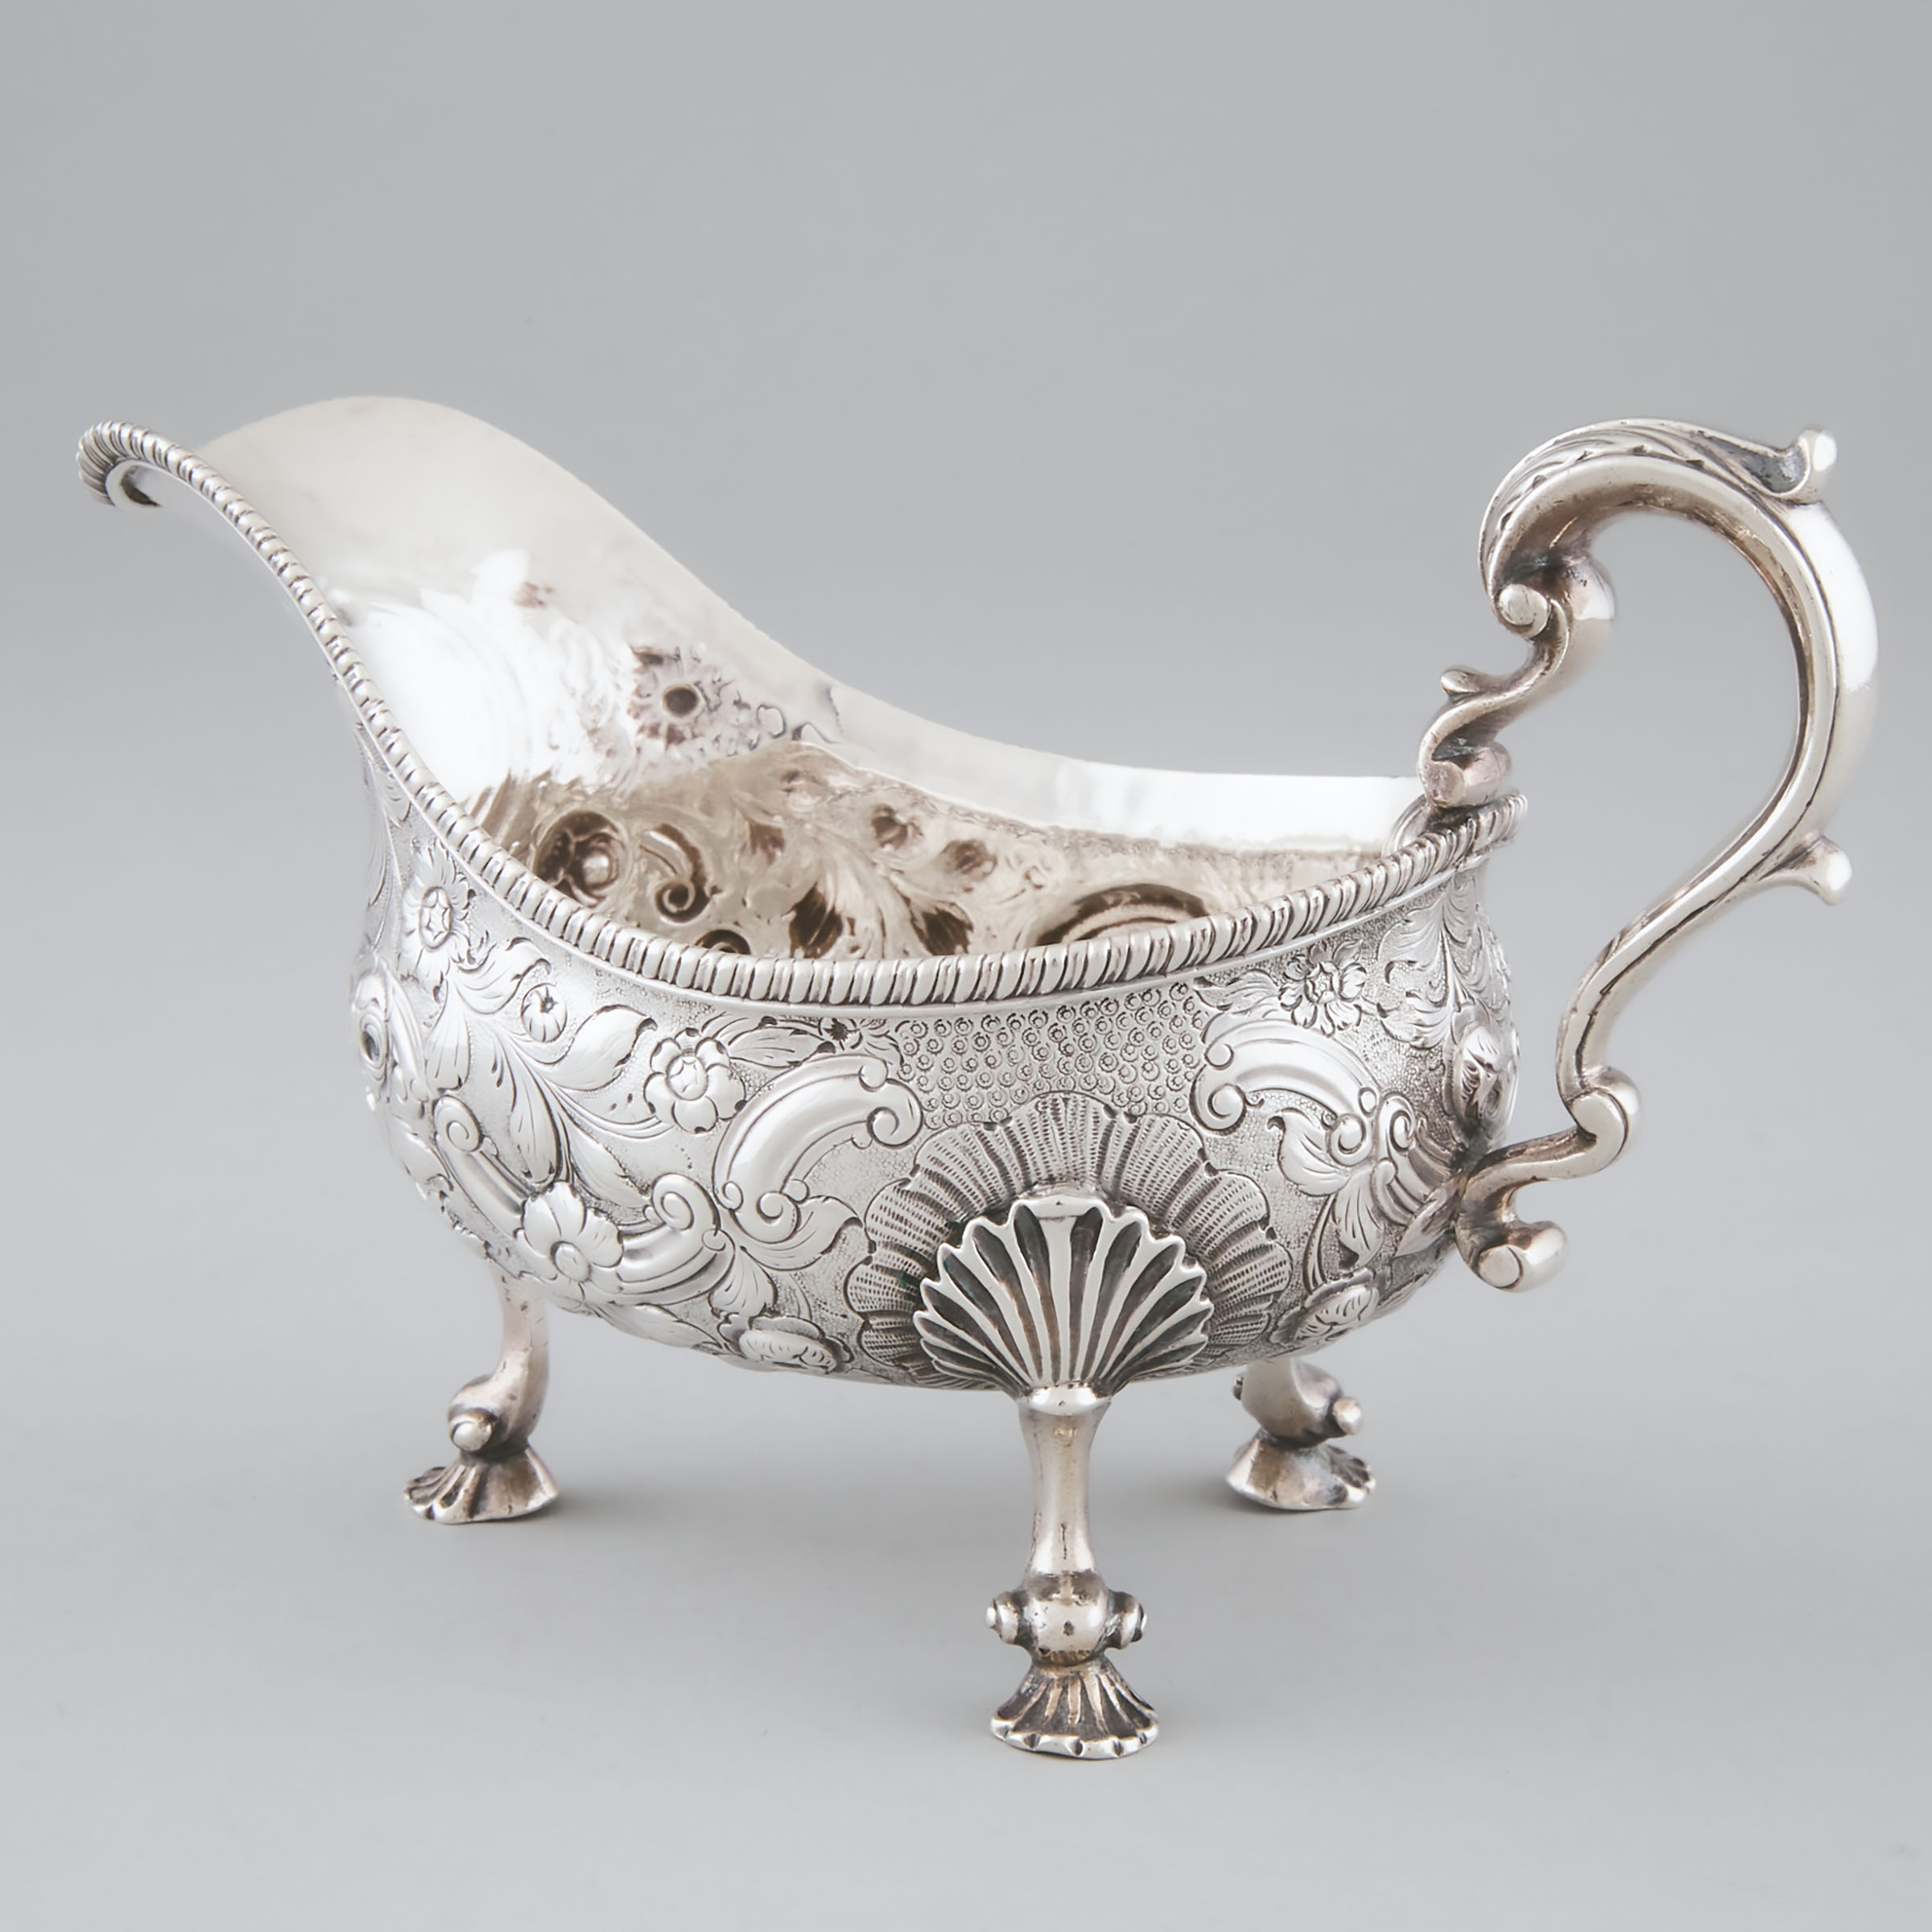 George IV Silver Sauce Boat, probably